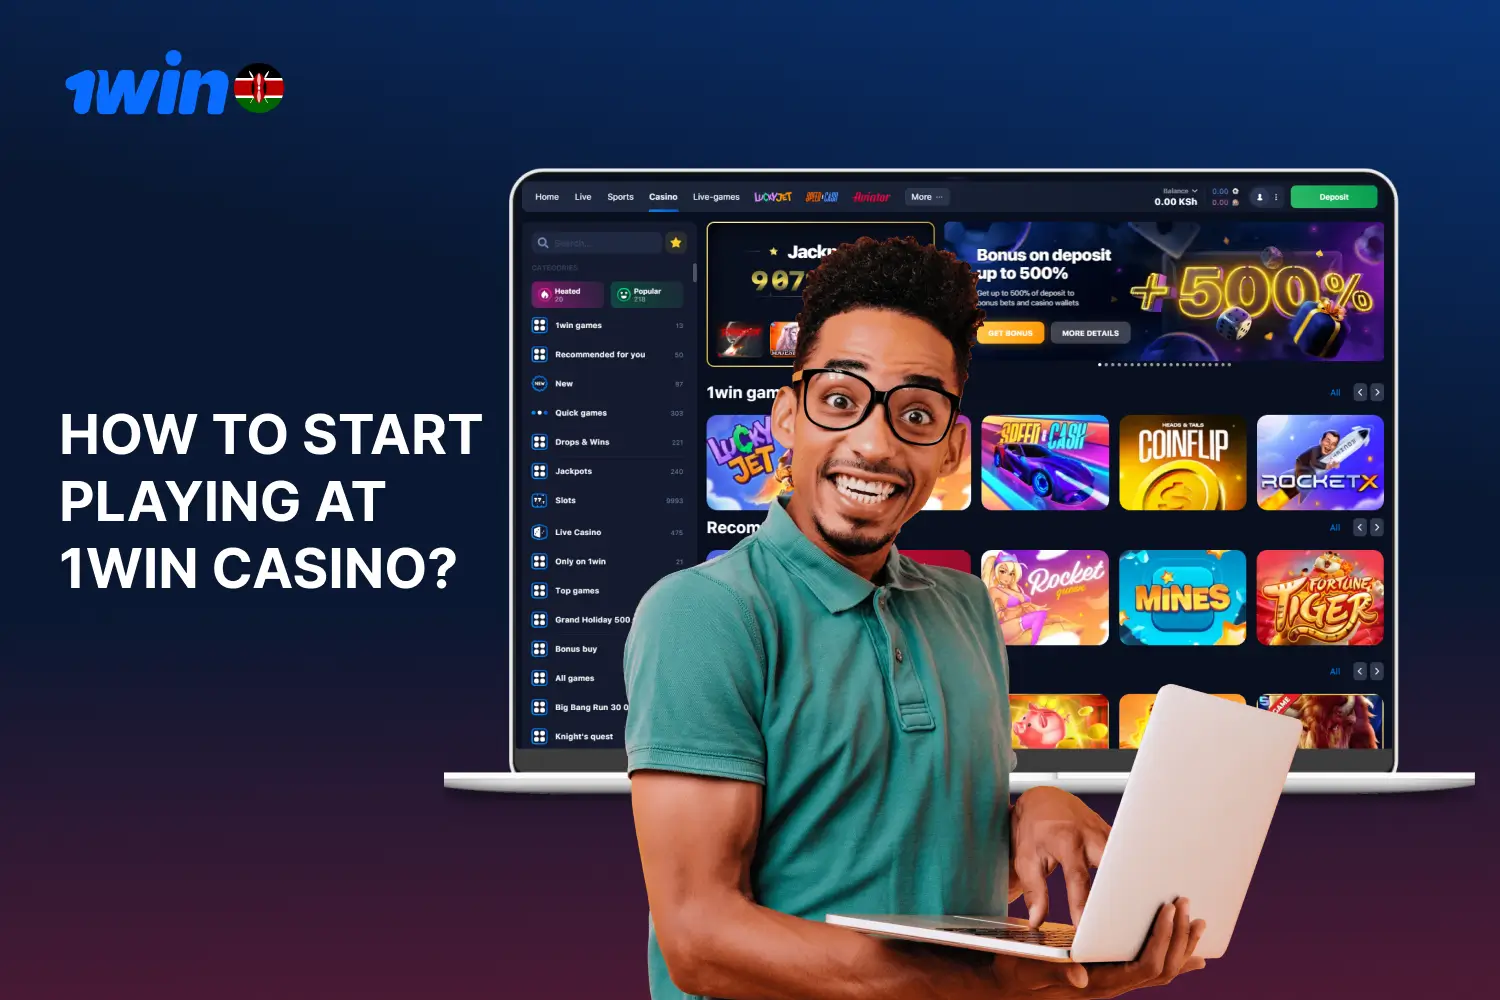 To start playing at 1win online casino users from Kenya need to make a few simple steps